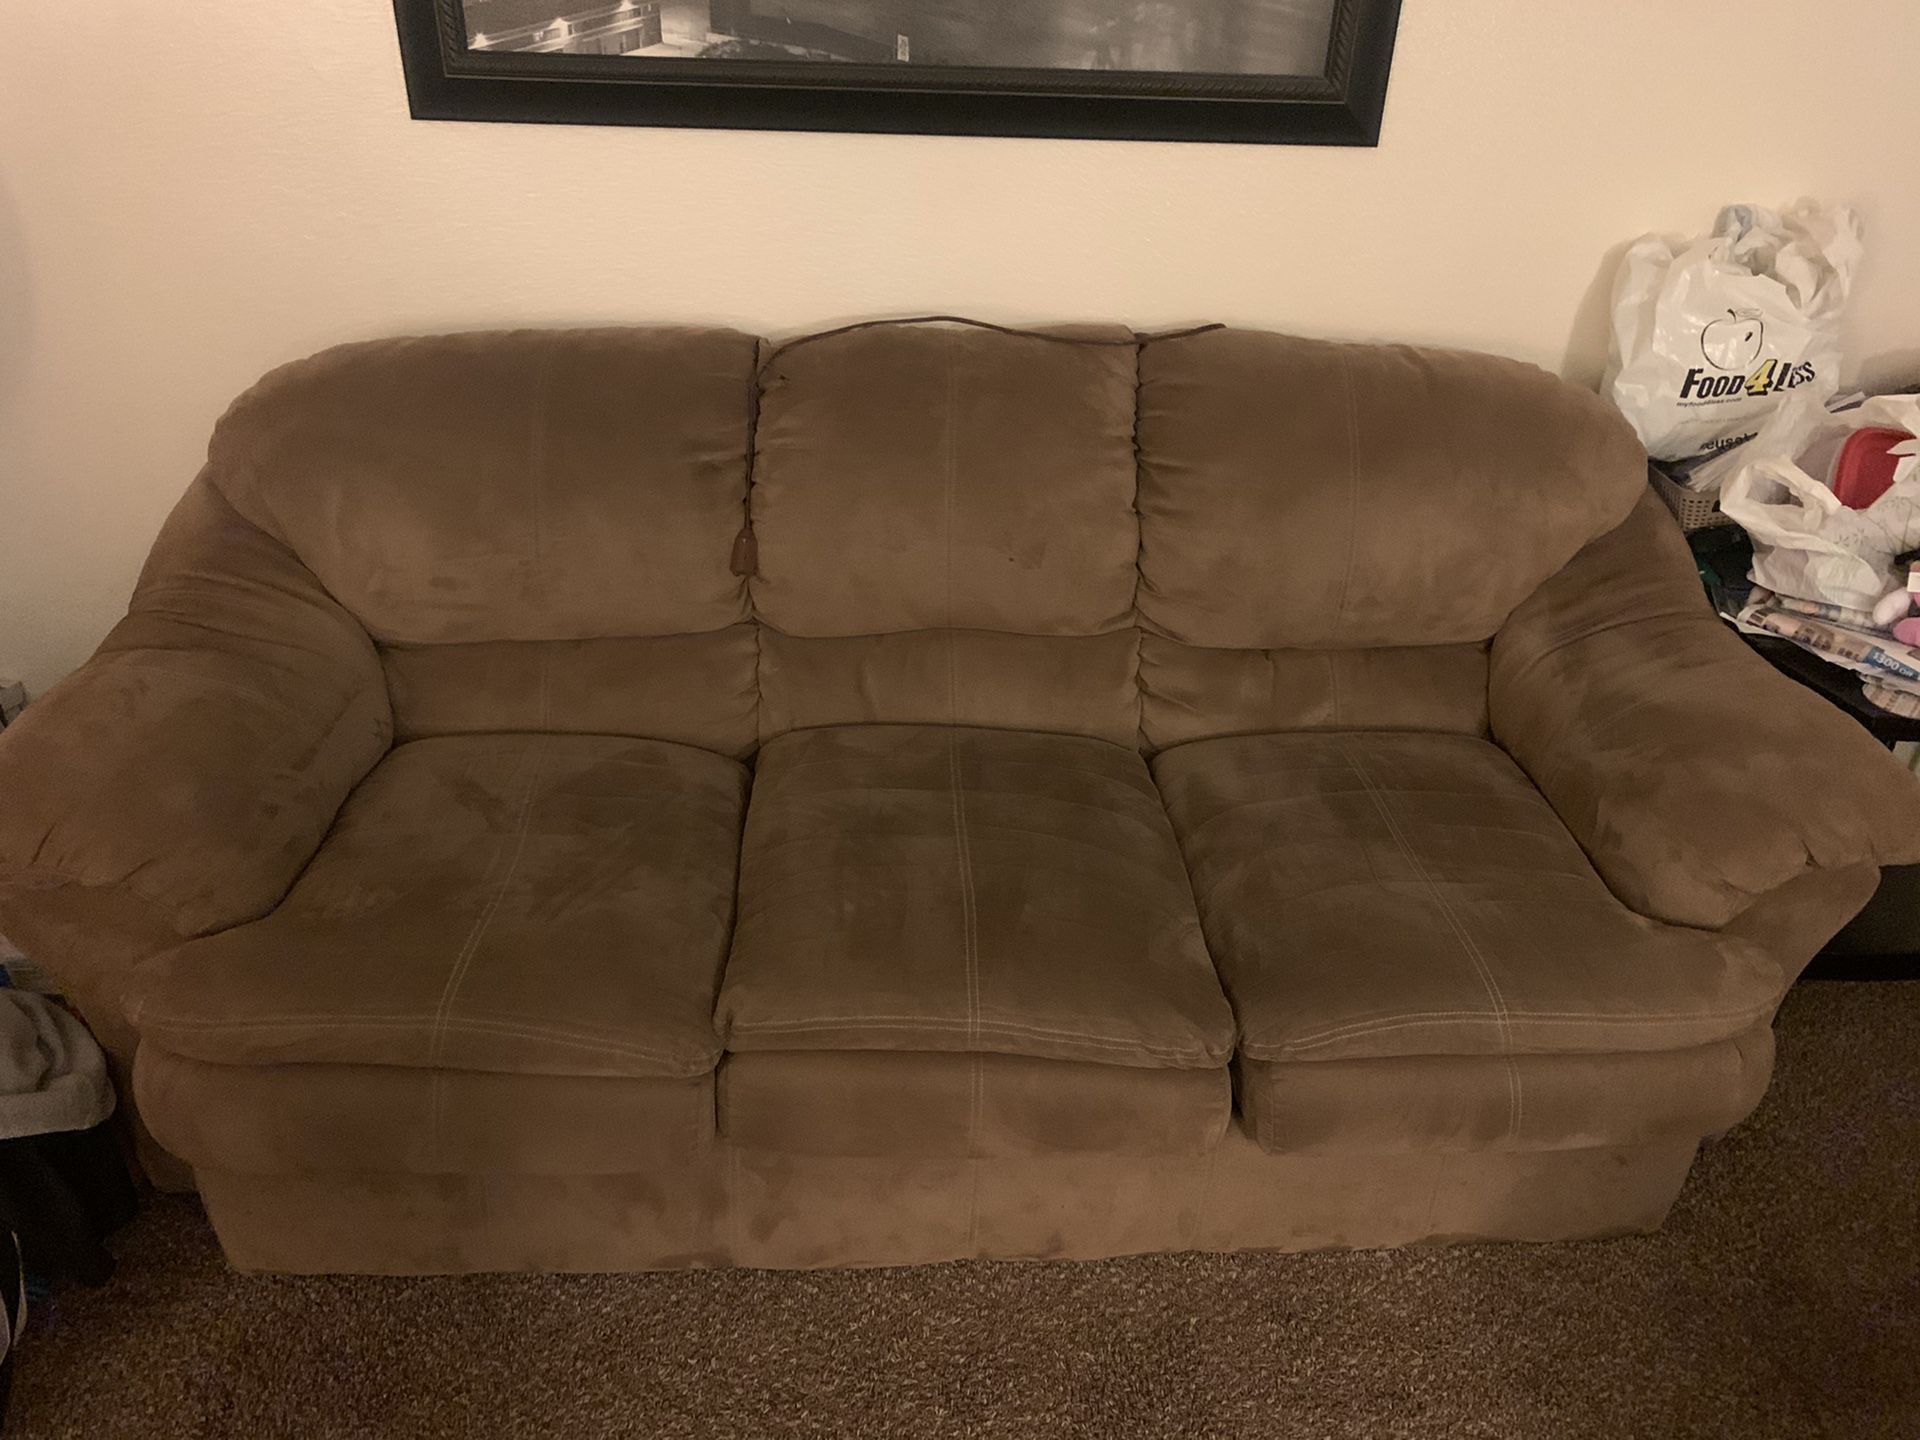 Couch, Love seat, & recliner